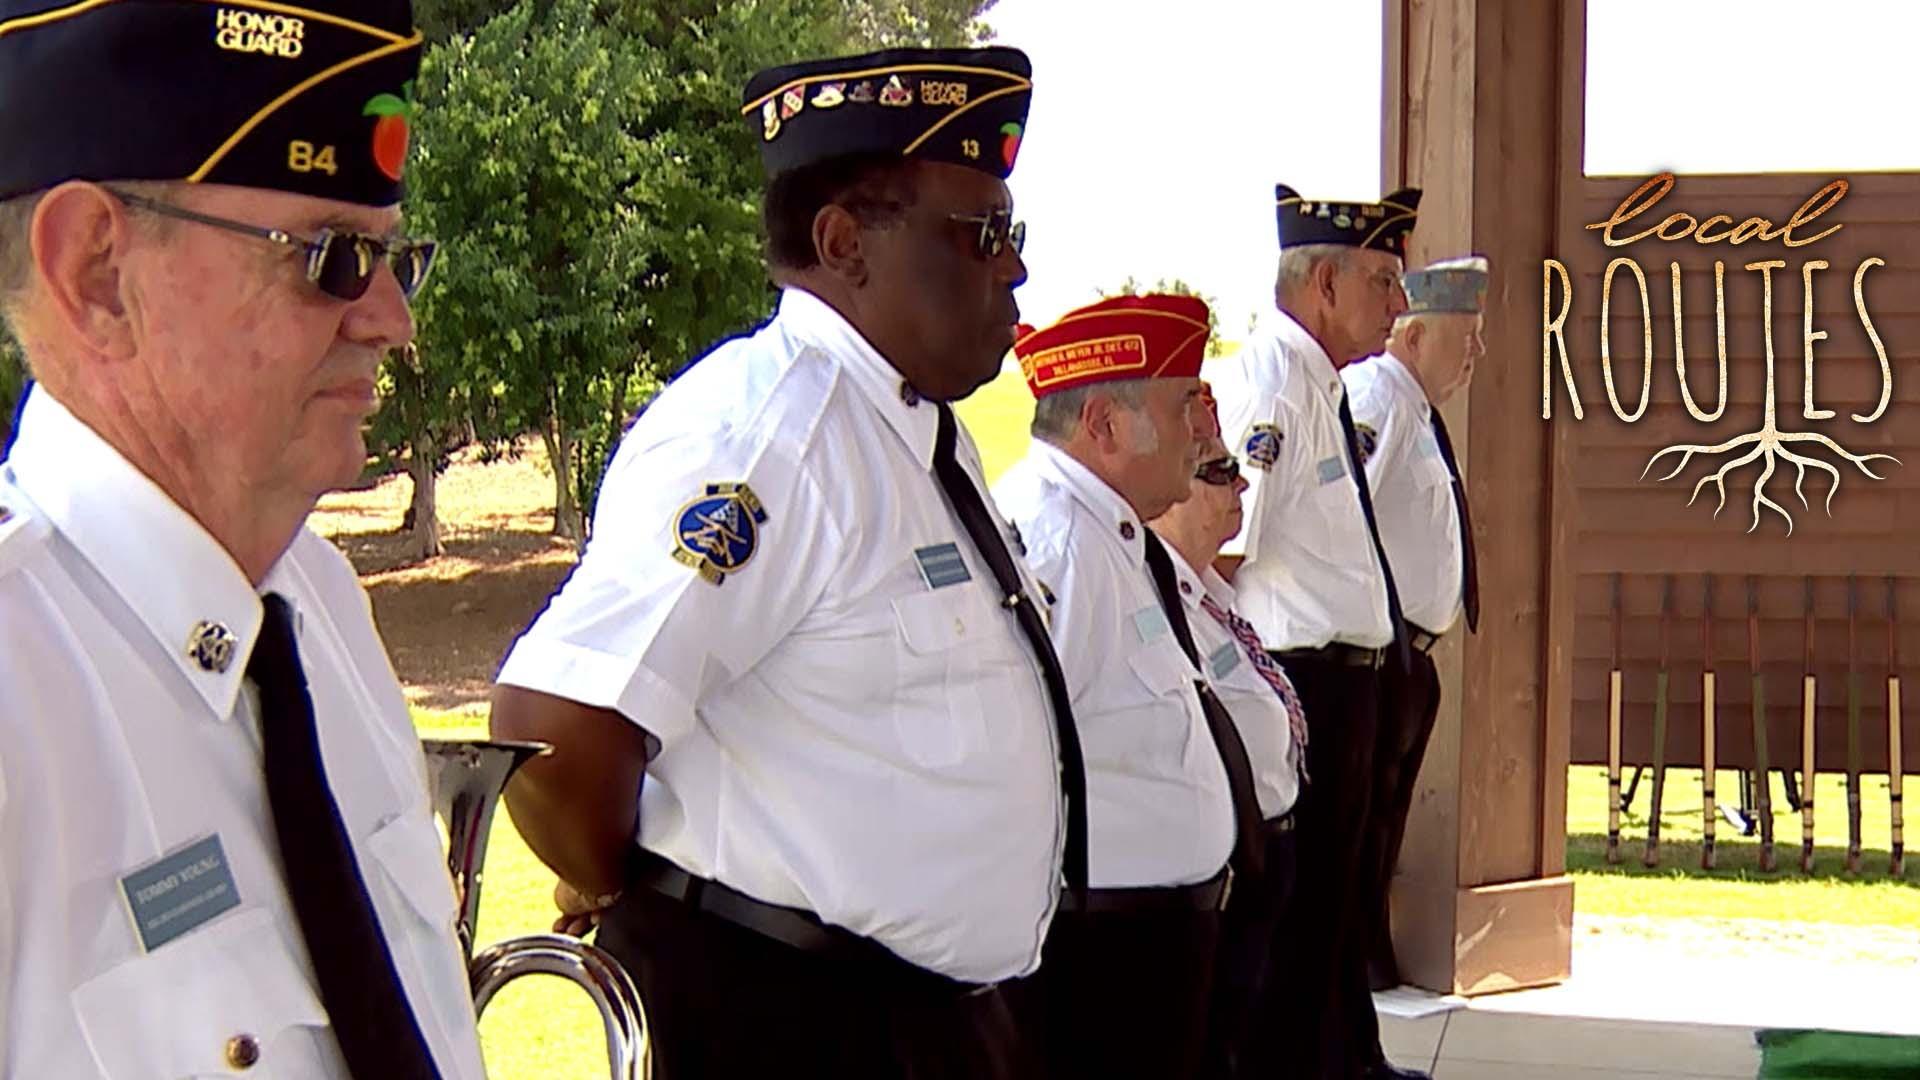 Local Routes: Honoring & Remembering Veterans (Episode 705)